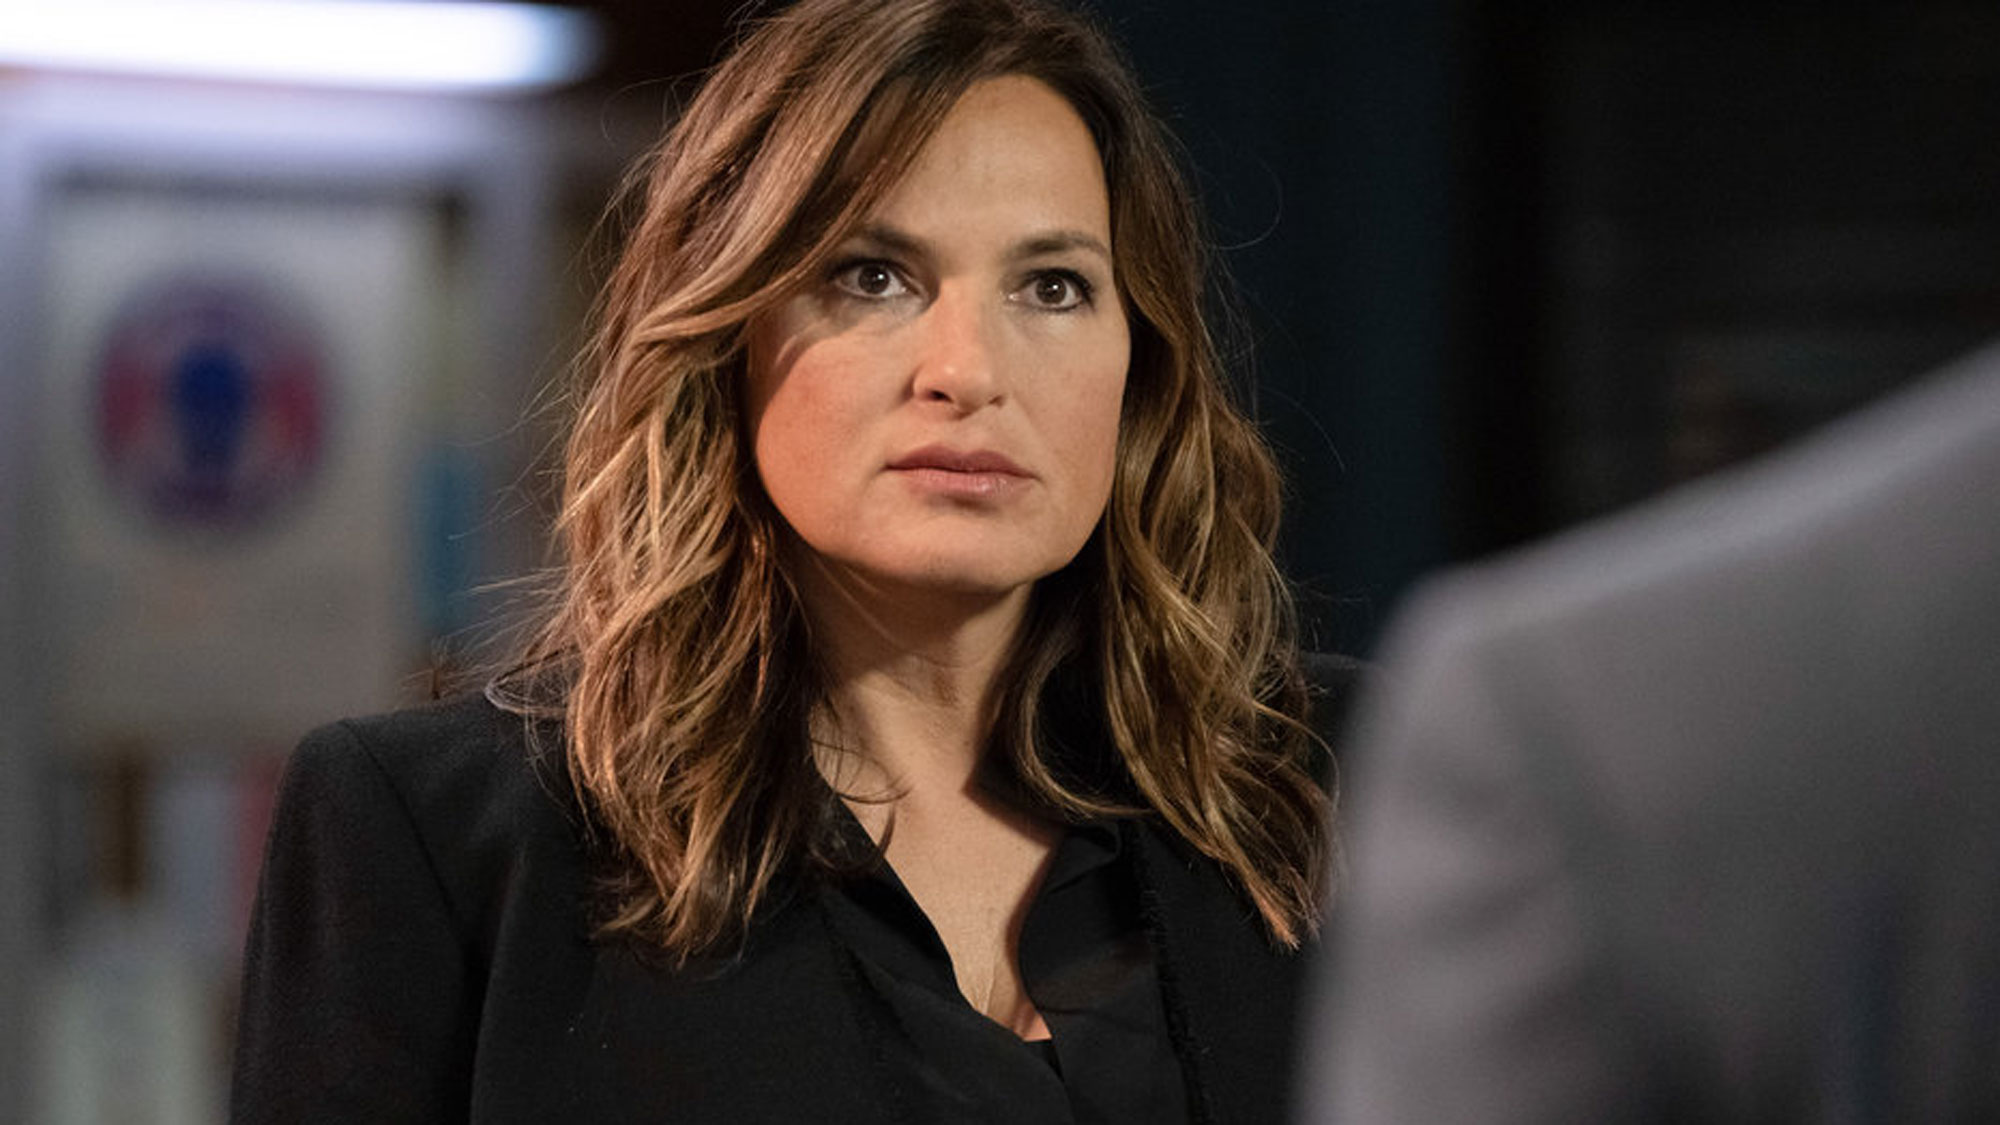 law and order svu season 6 episode 4 cast